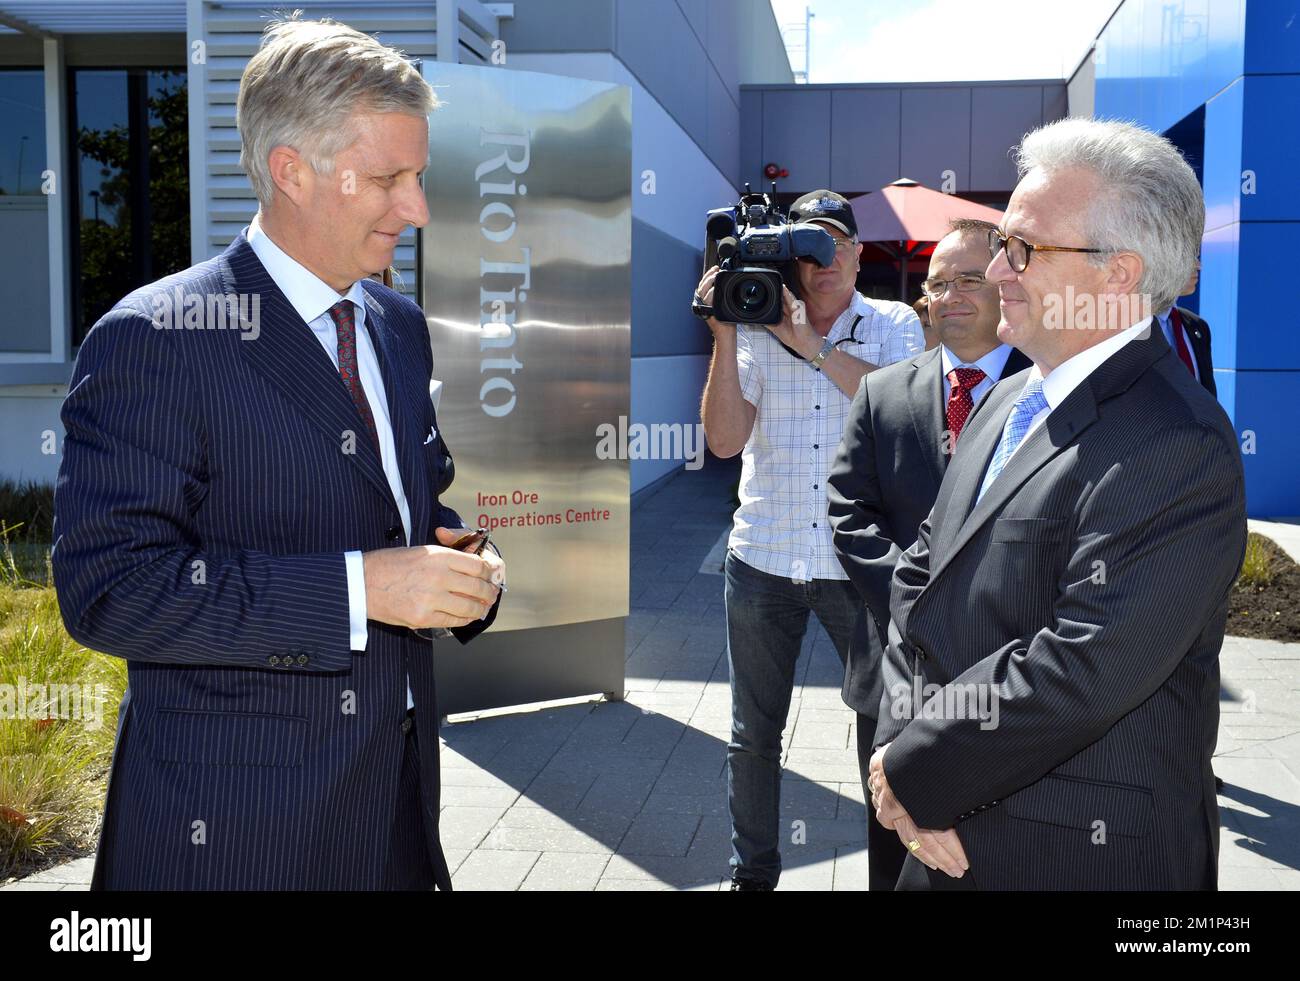 20121119 - PERTH, AUSTRALIA: Crown Prince Philippe of Belgium and Belgium  Hugo Bague, Group executive, people and organisation of Rio Tinto pictured  during a visit of the remote control mining center of